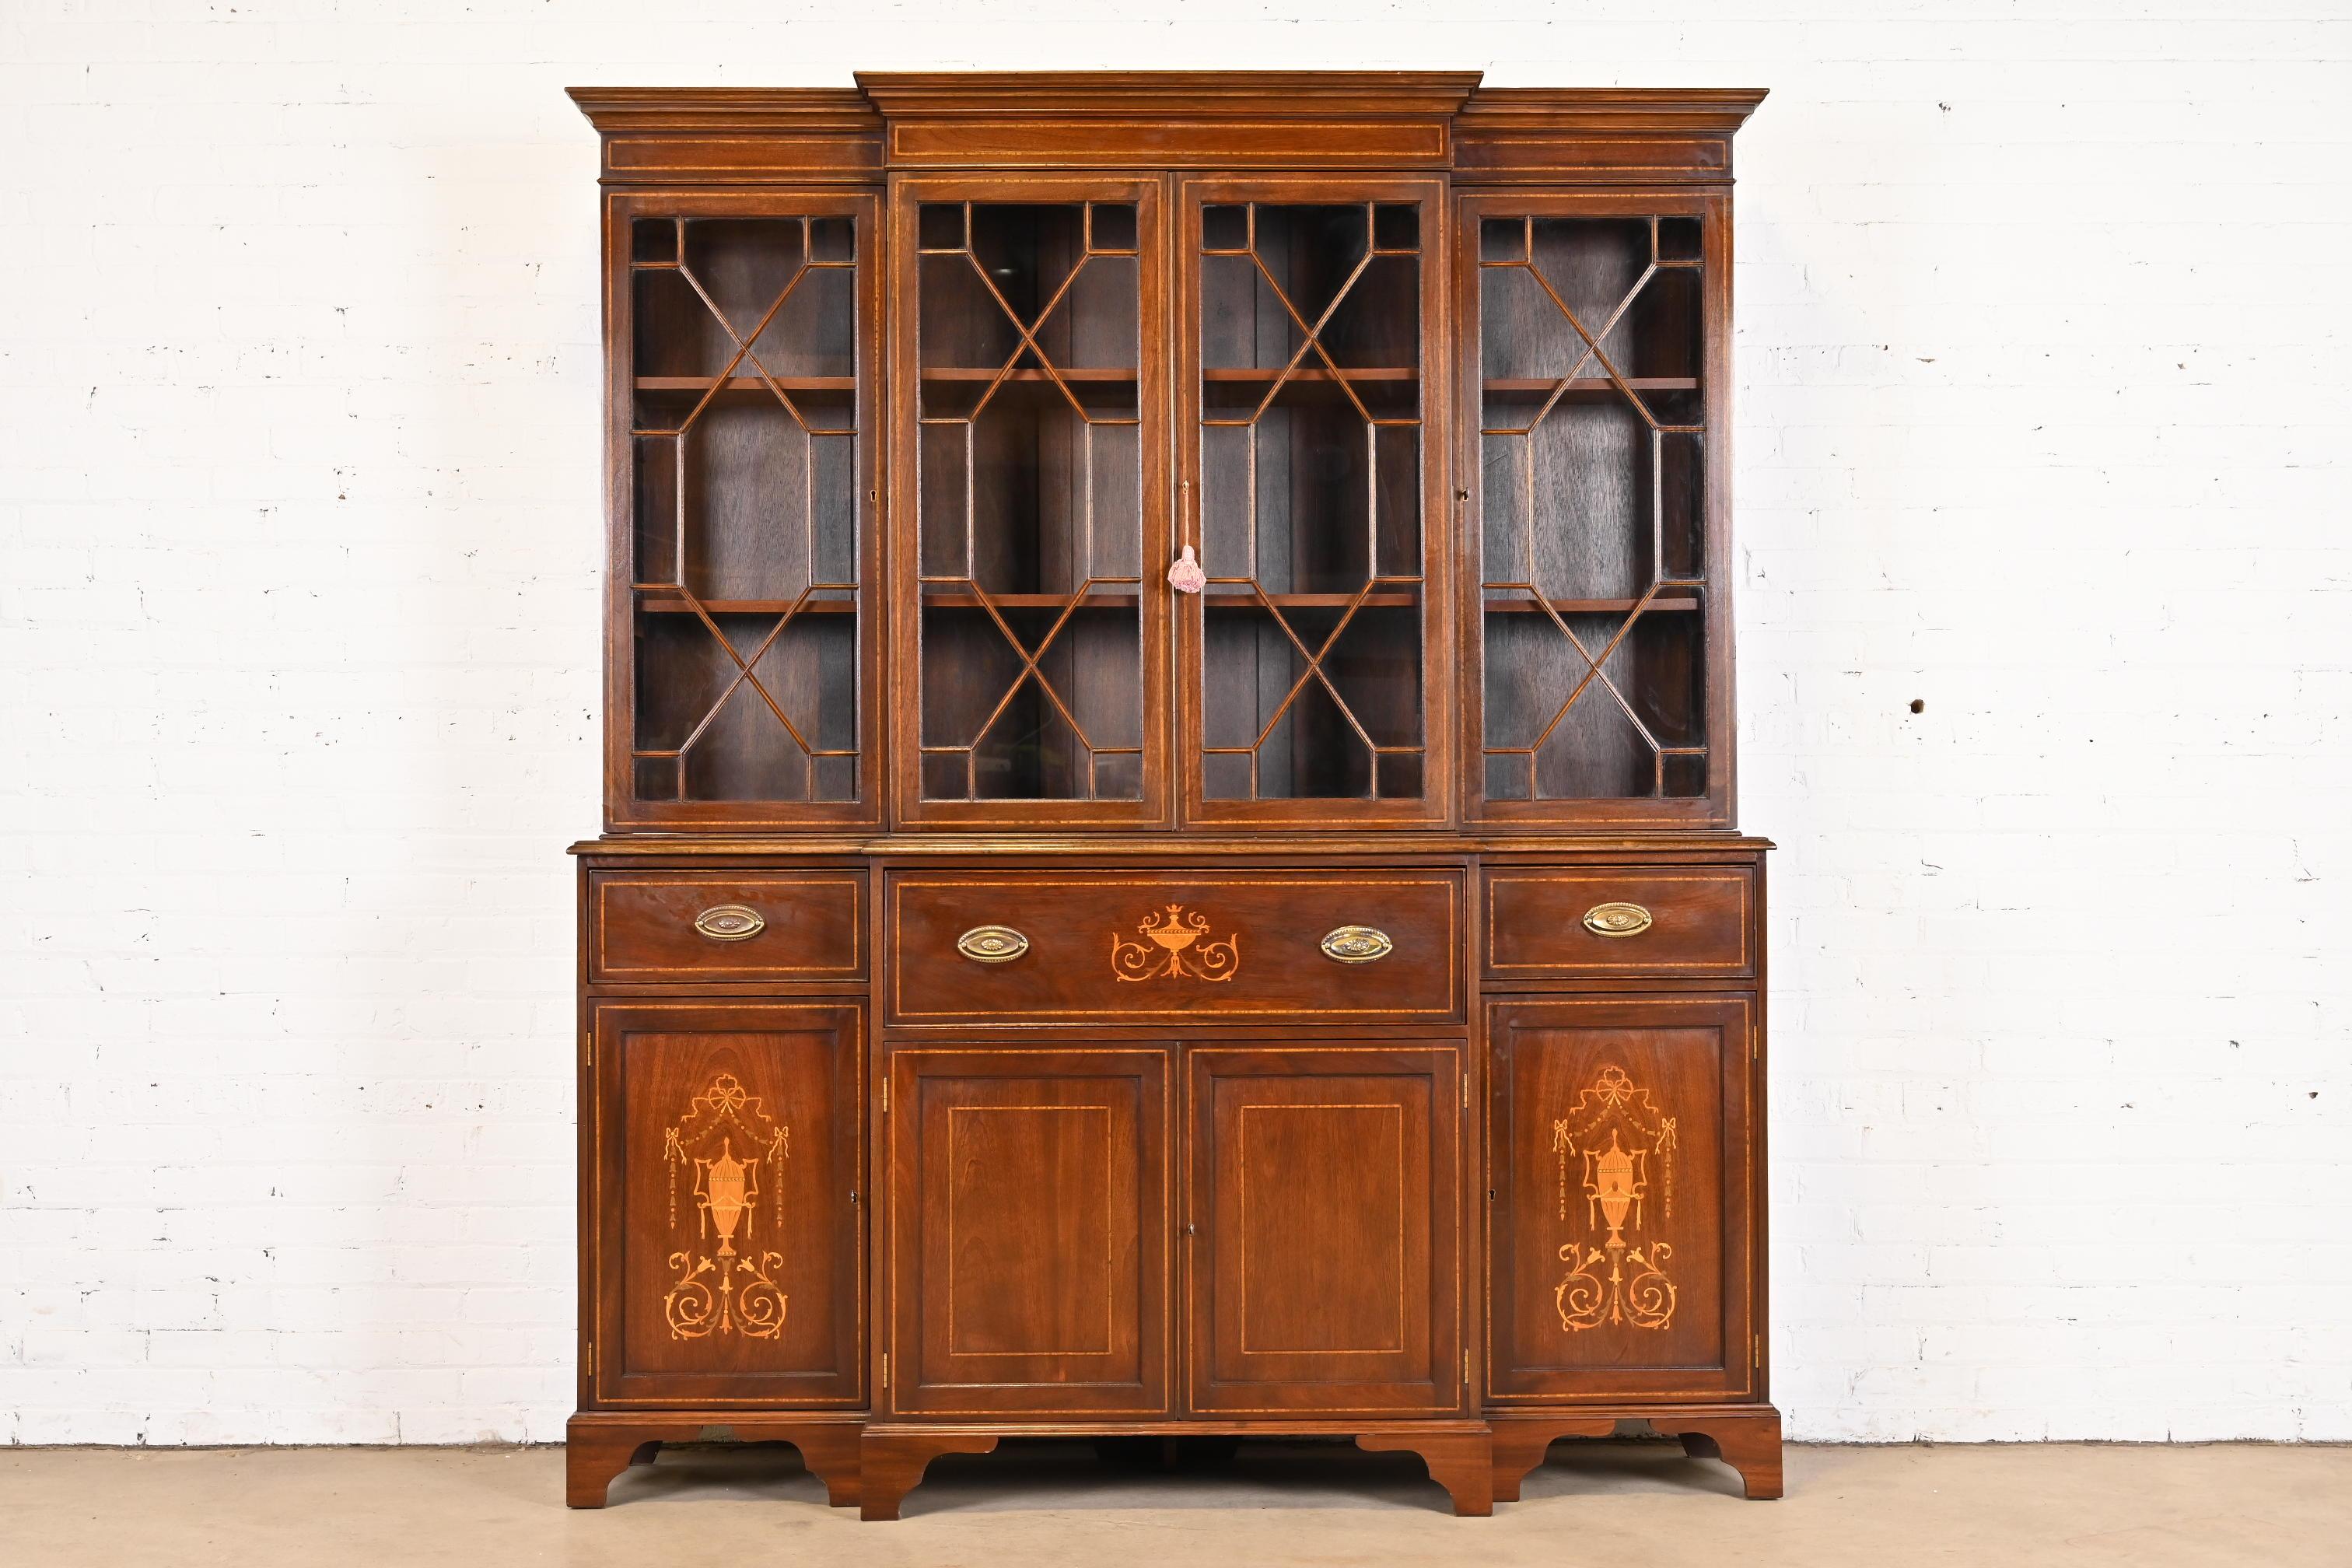 A gorgeous Georgian or Sheraton style breakfront bookcase or china cabinet with drop front secretary desk

In the manner of Baker Furniture

USA, Early 20th Century

Mahogany, inlaid satinwood marquetry, mullioned glass front doors, original